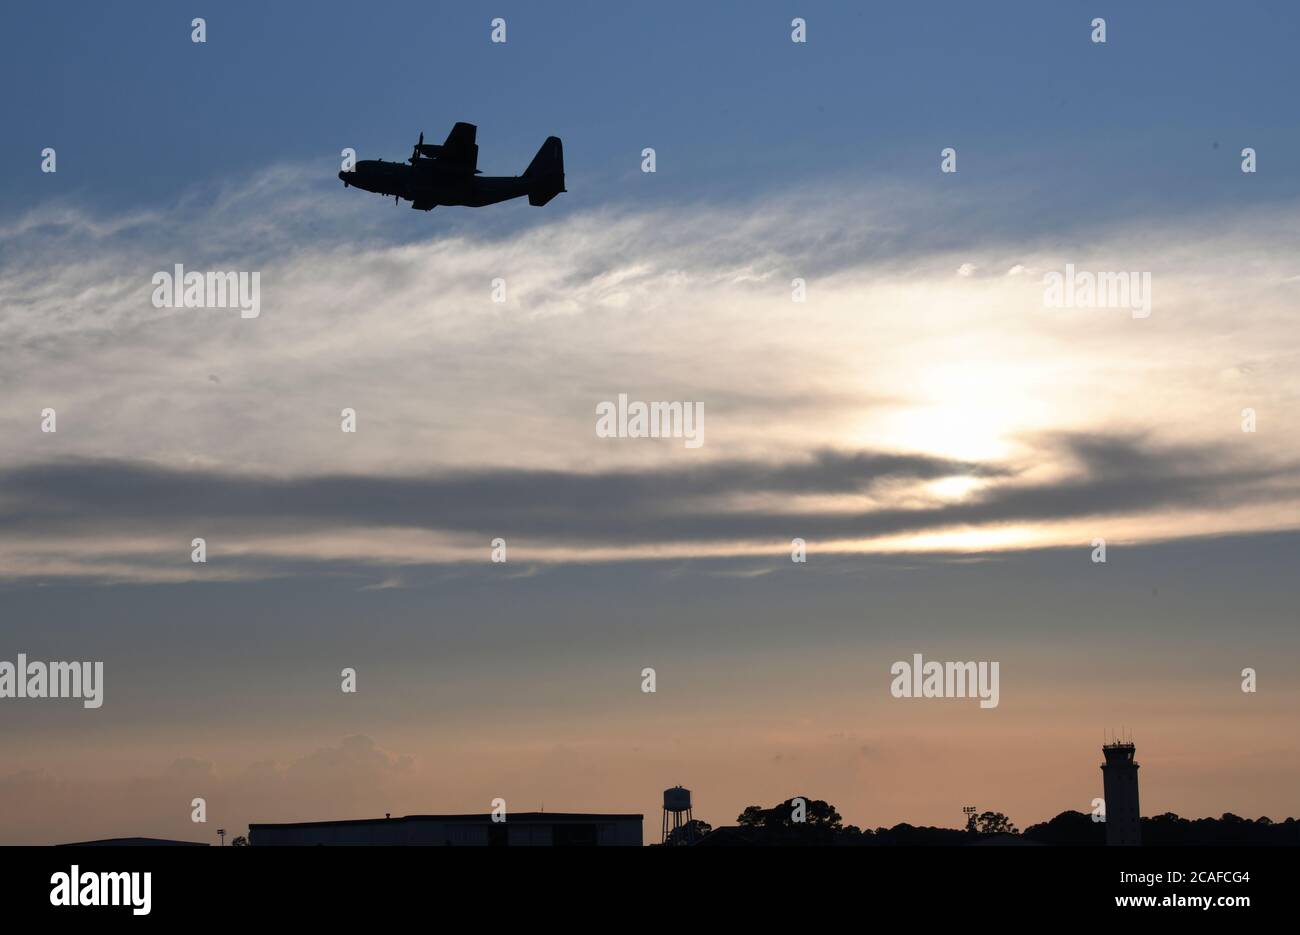 An AC-130J Ghostrider gunship with the 73rd Special Operations Squadron flies over the flightline at Hurlburt Field, Florida, Aug. 5, 2020. The AC-130J is a highly modified aircraft containing advanced features with its primary missions of close air support, air interdiction and armed reconnaissance. (U.S. Air Force photo by Airman 1st Class Hailey M. Ziegler) Stock Photo